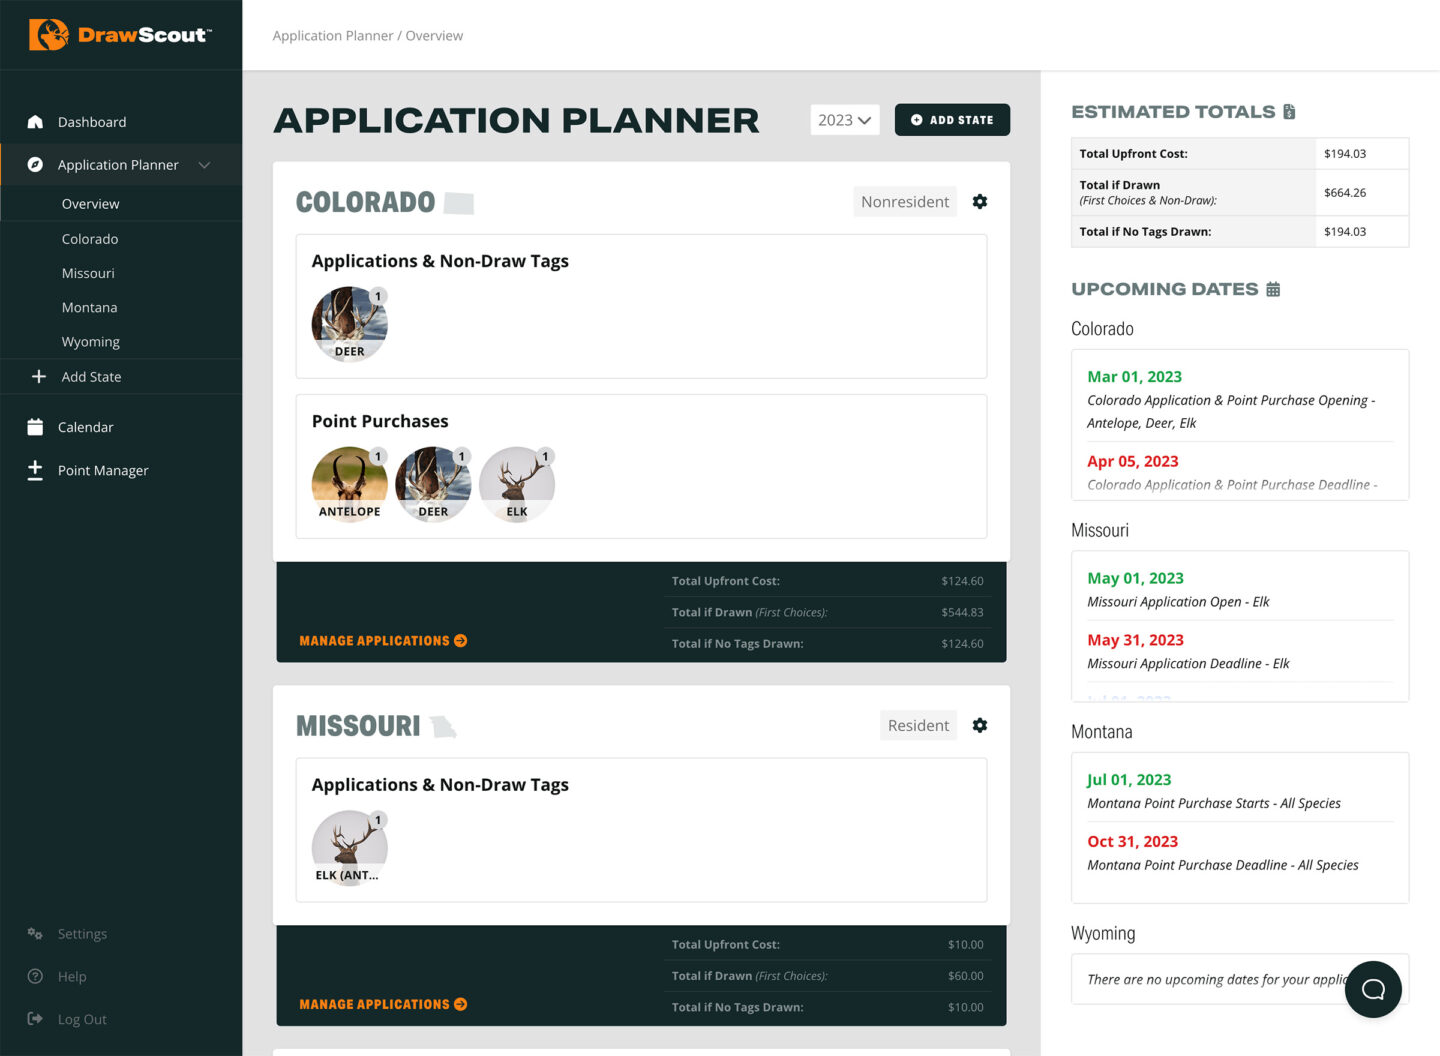 DrawScout Application Planner - Overview page